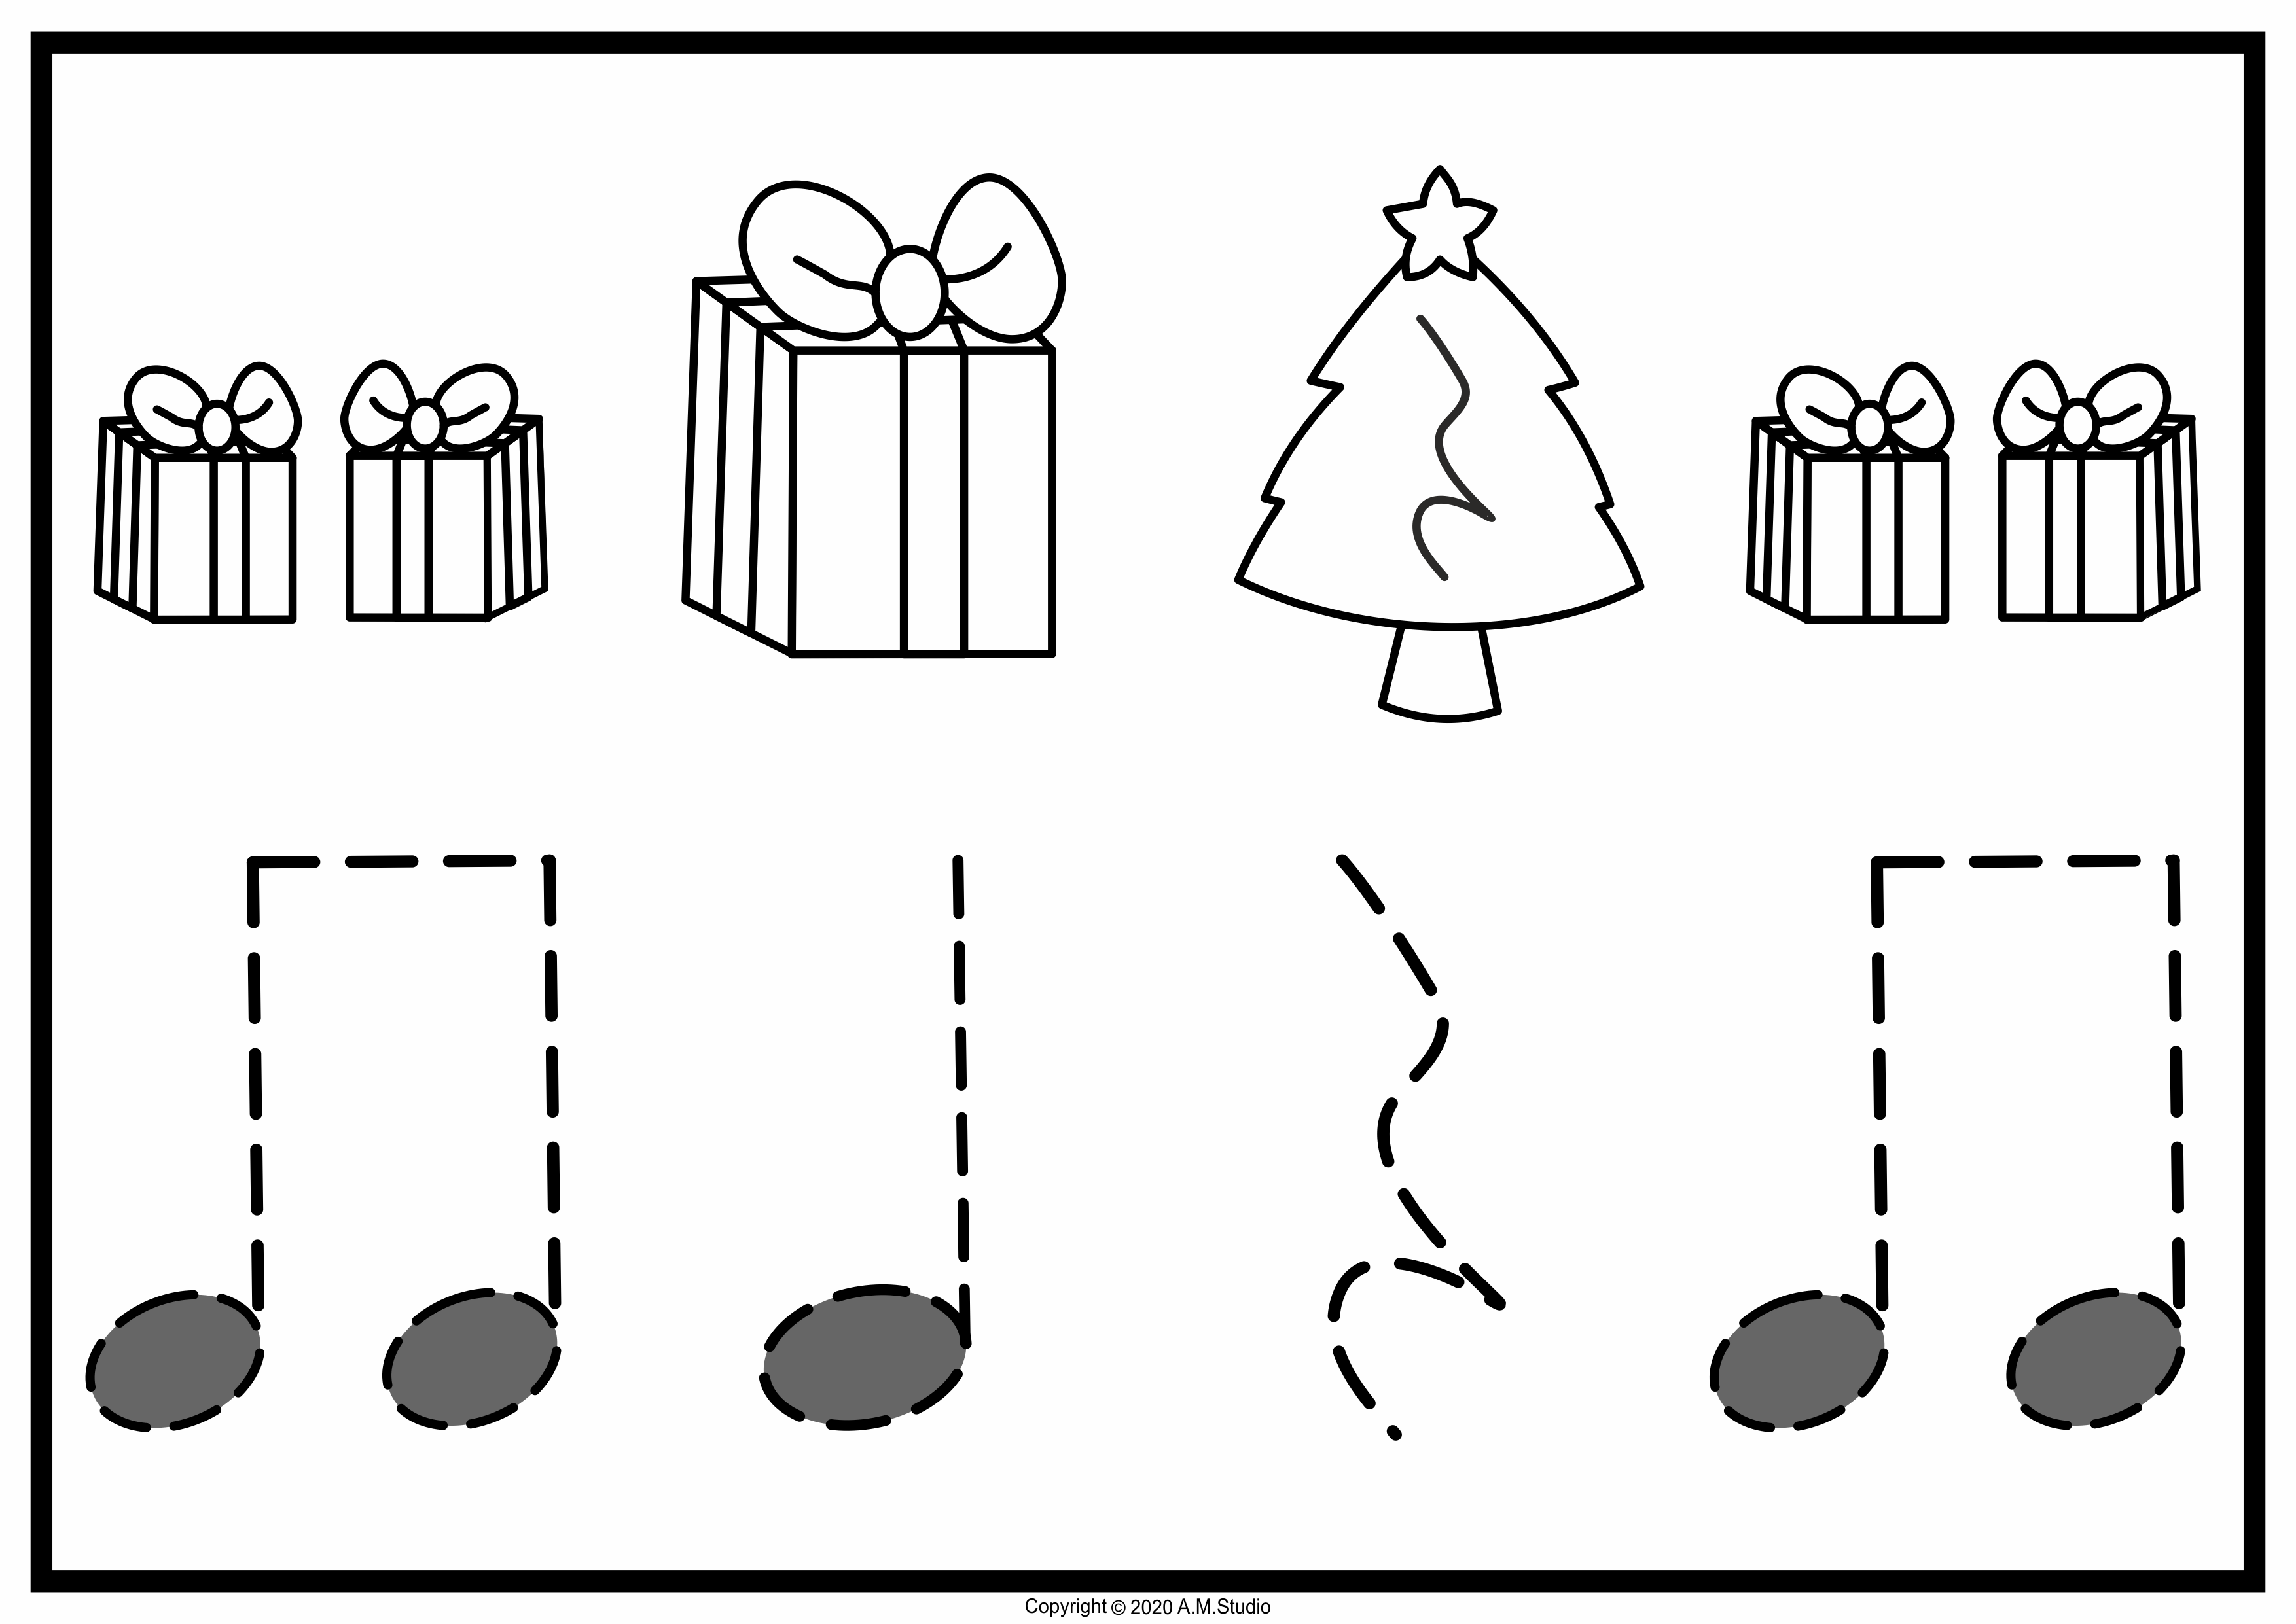 Color, Trace, Clap! Christmas Music Rhythm Activities {Ta, Ti-Ti, Rest} (img # 3)